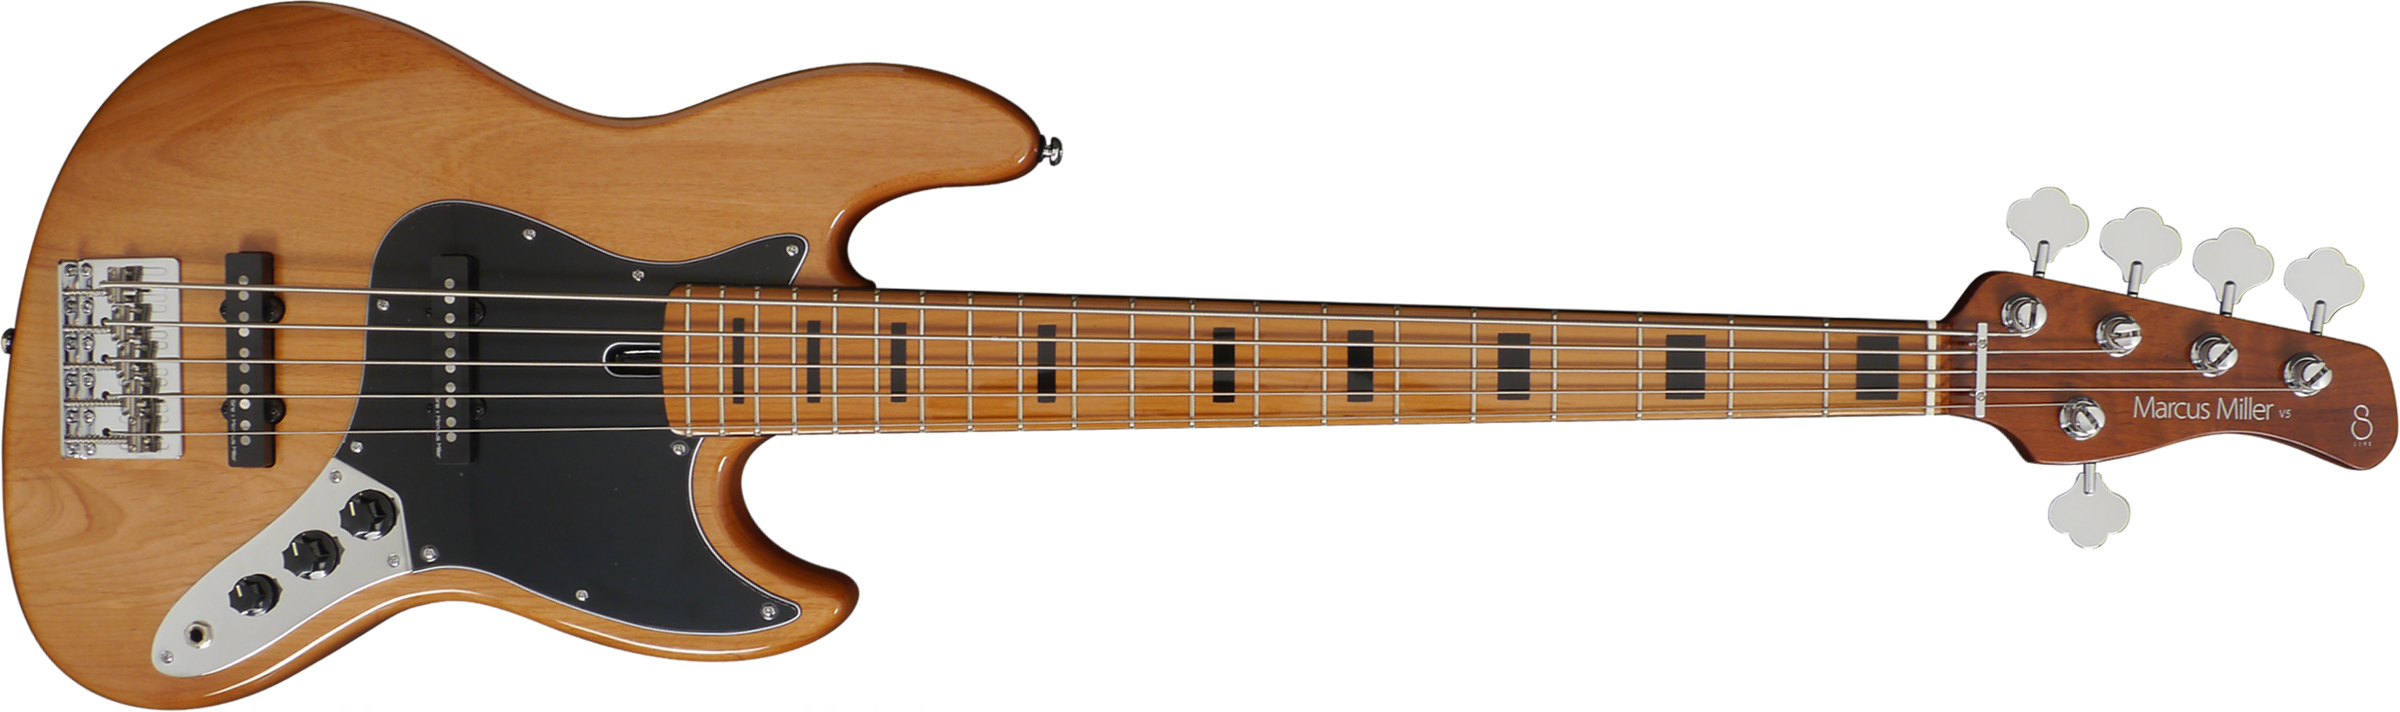 Marcus Miller V5 Alder 5st Mn - Natural - Solid body electric bass - Main picture